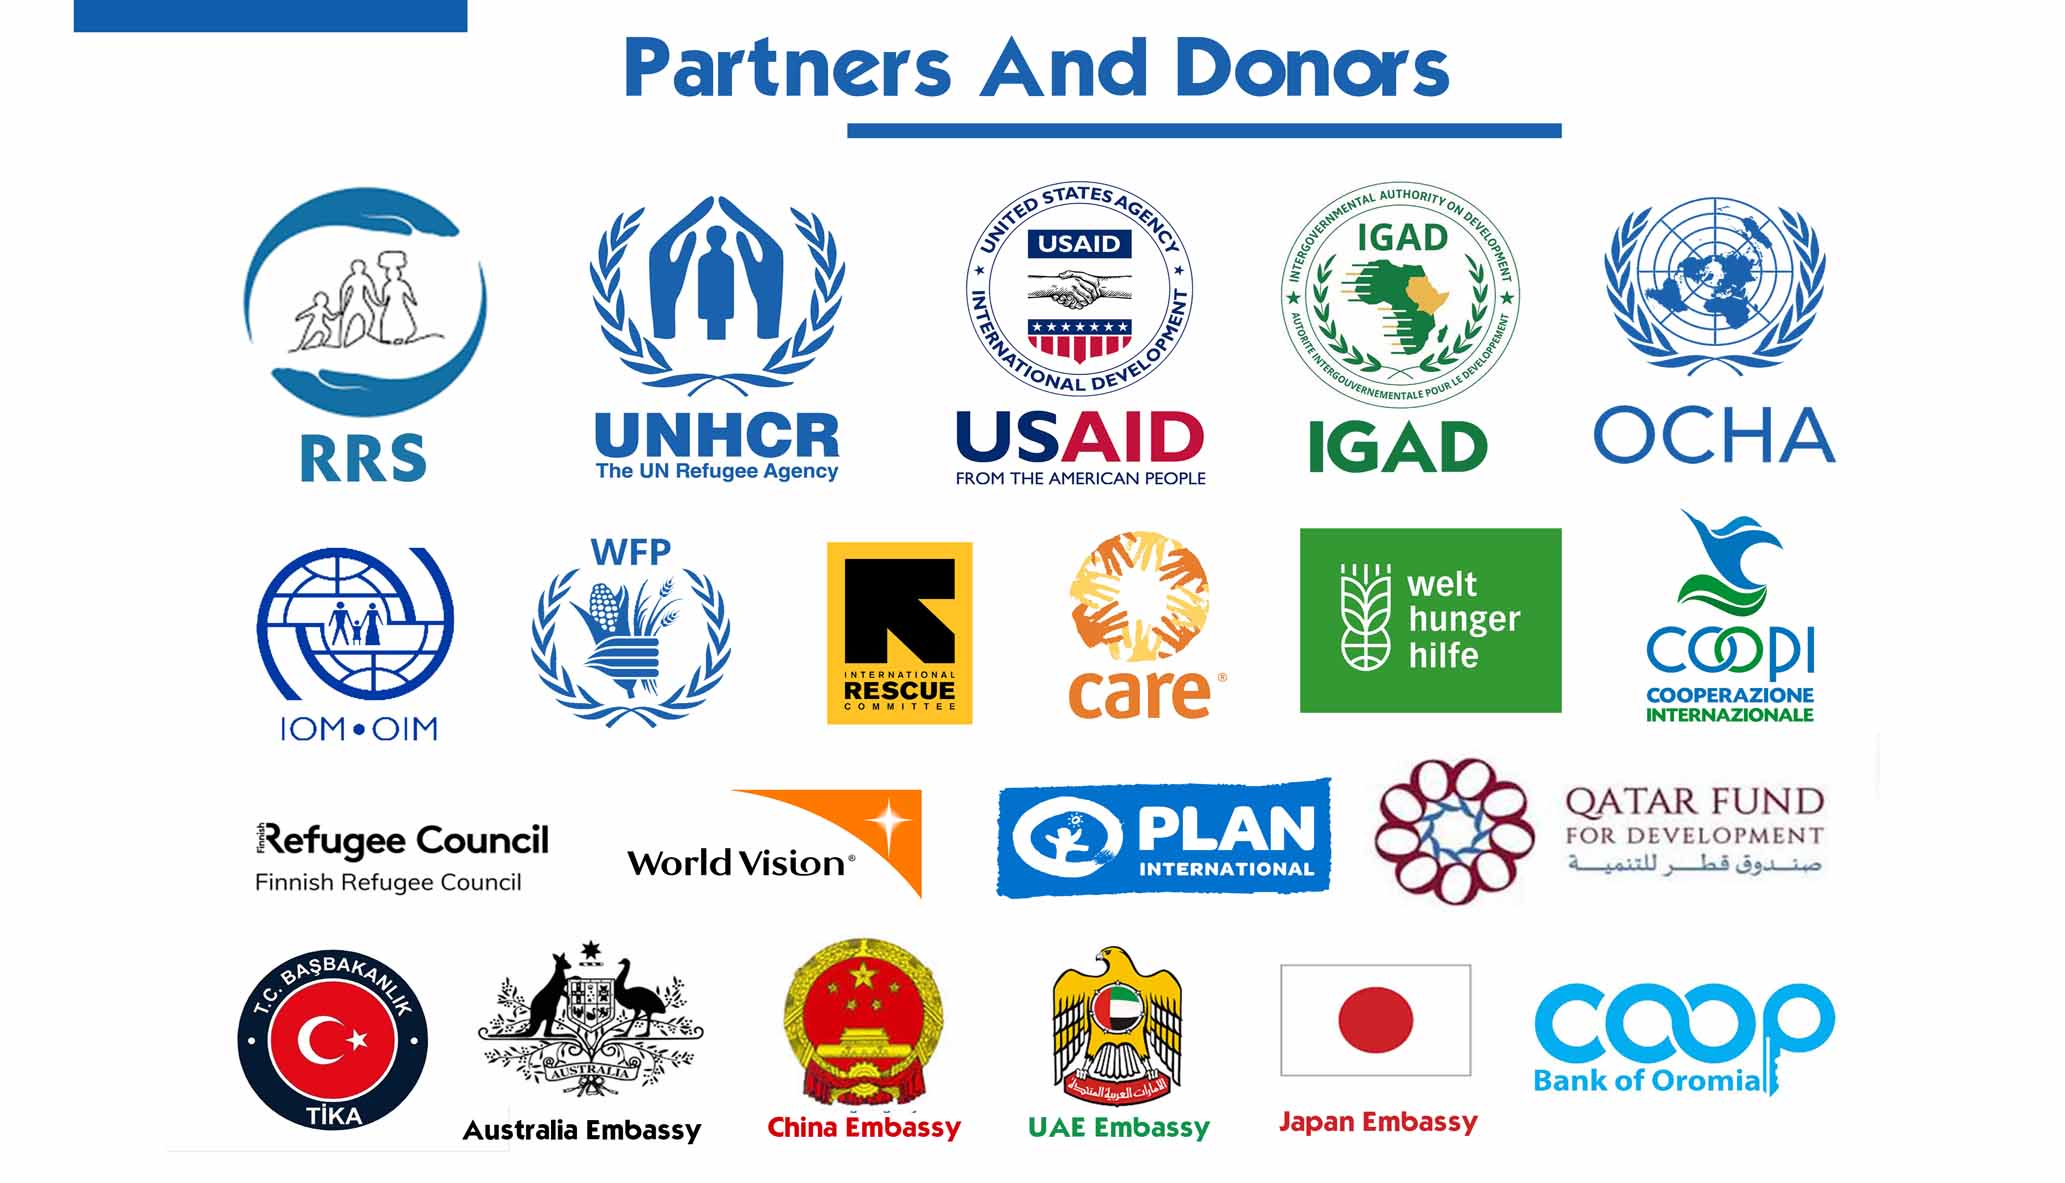 ANE Donors and Partners